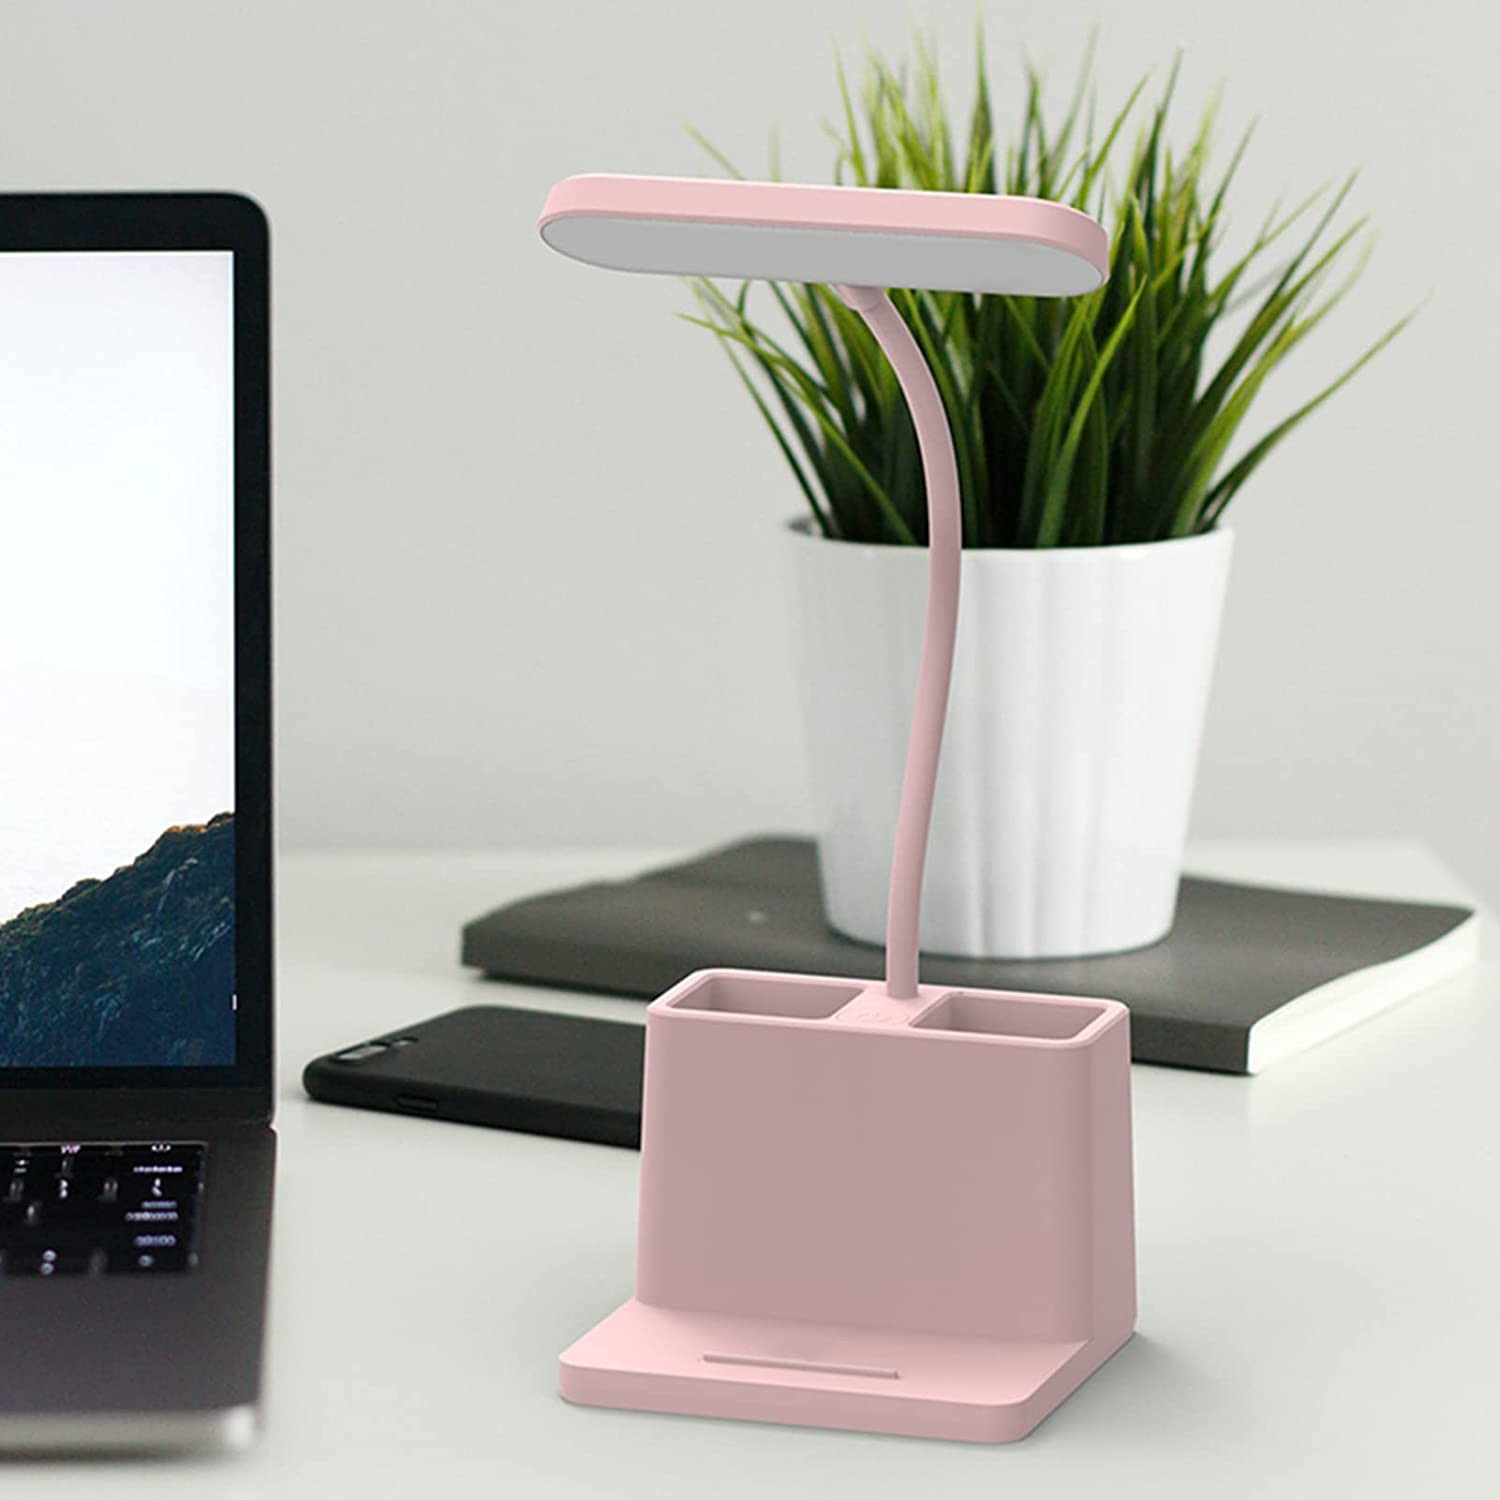 HH829 Hot Sale  Led Light Bedside Lamp Modern Study Table Lamp With Pen Holder New Product Led Desk Lamp Eye-Caring